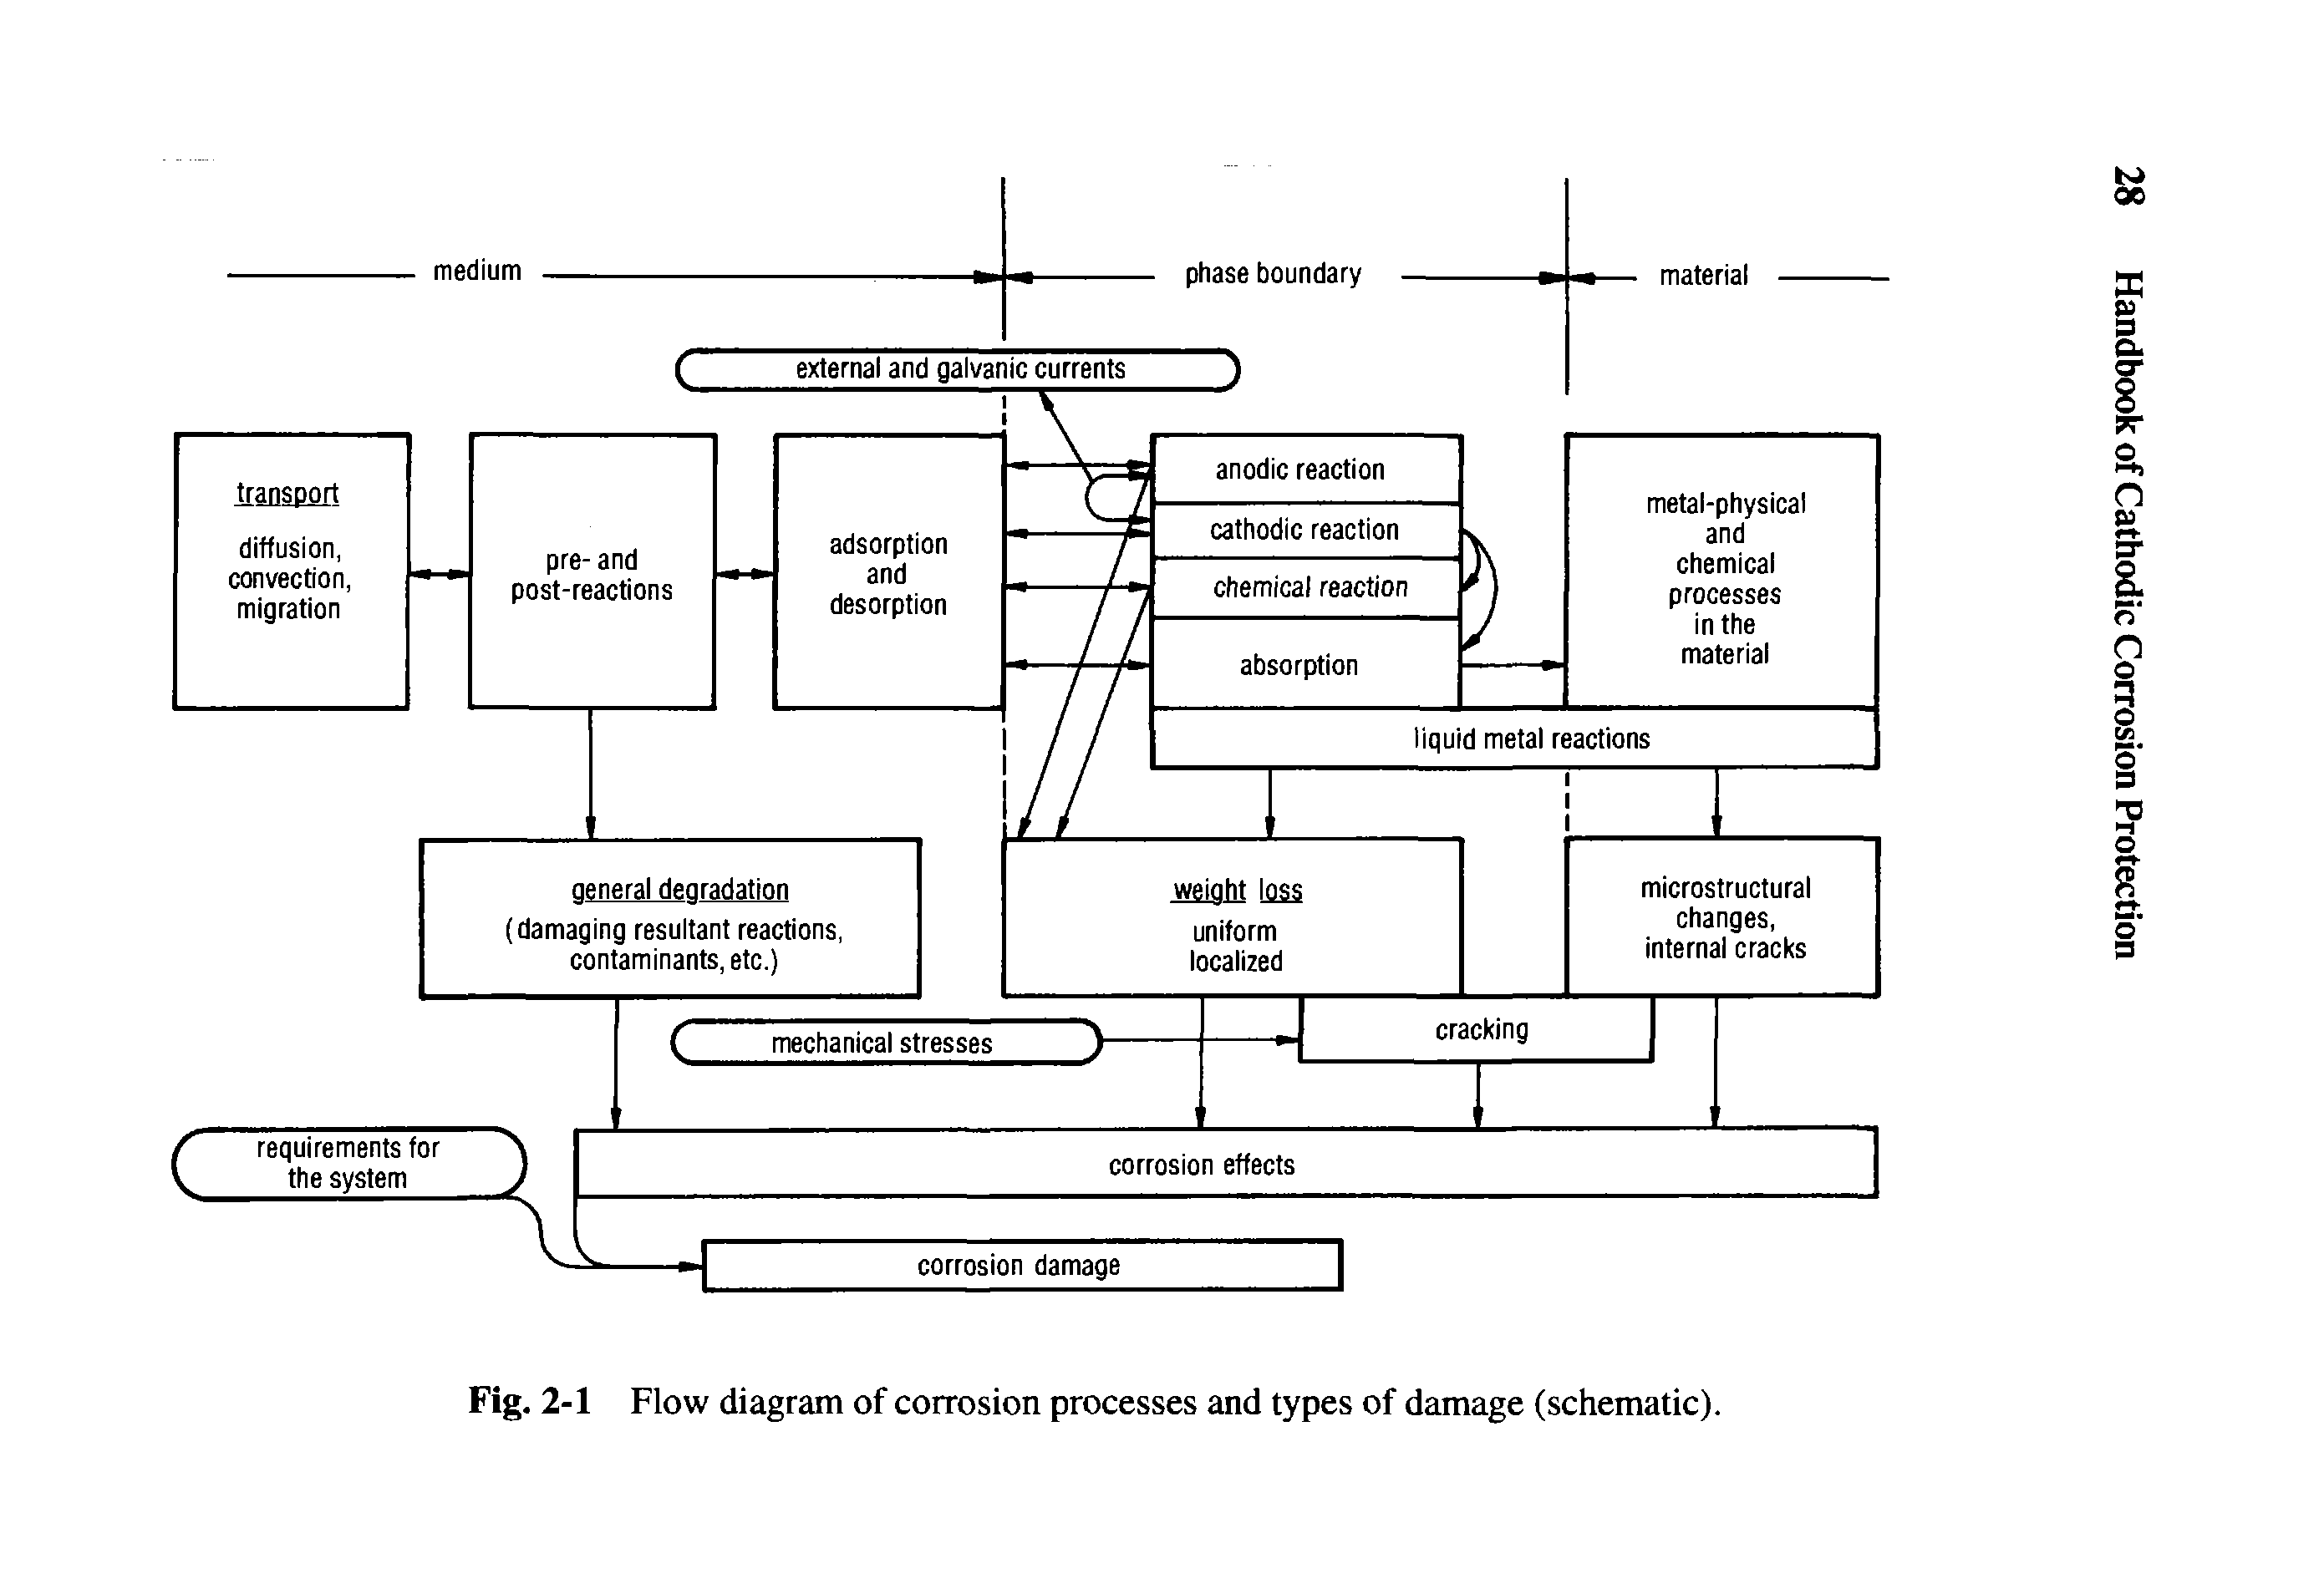 Fig. 2-1 Flow diagram of corrosion processes and types of damage (schematic).